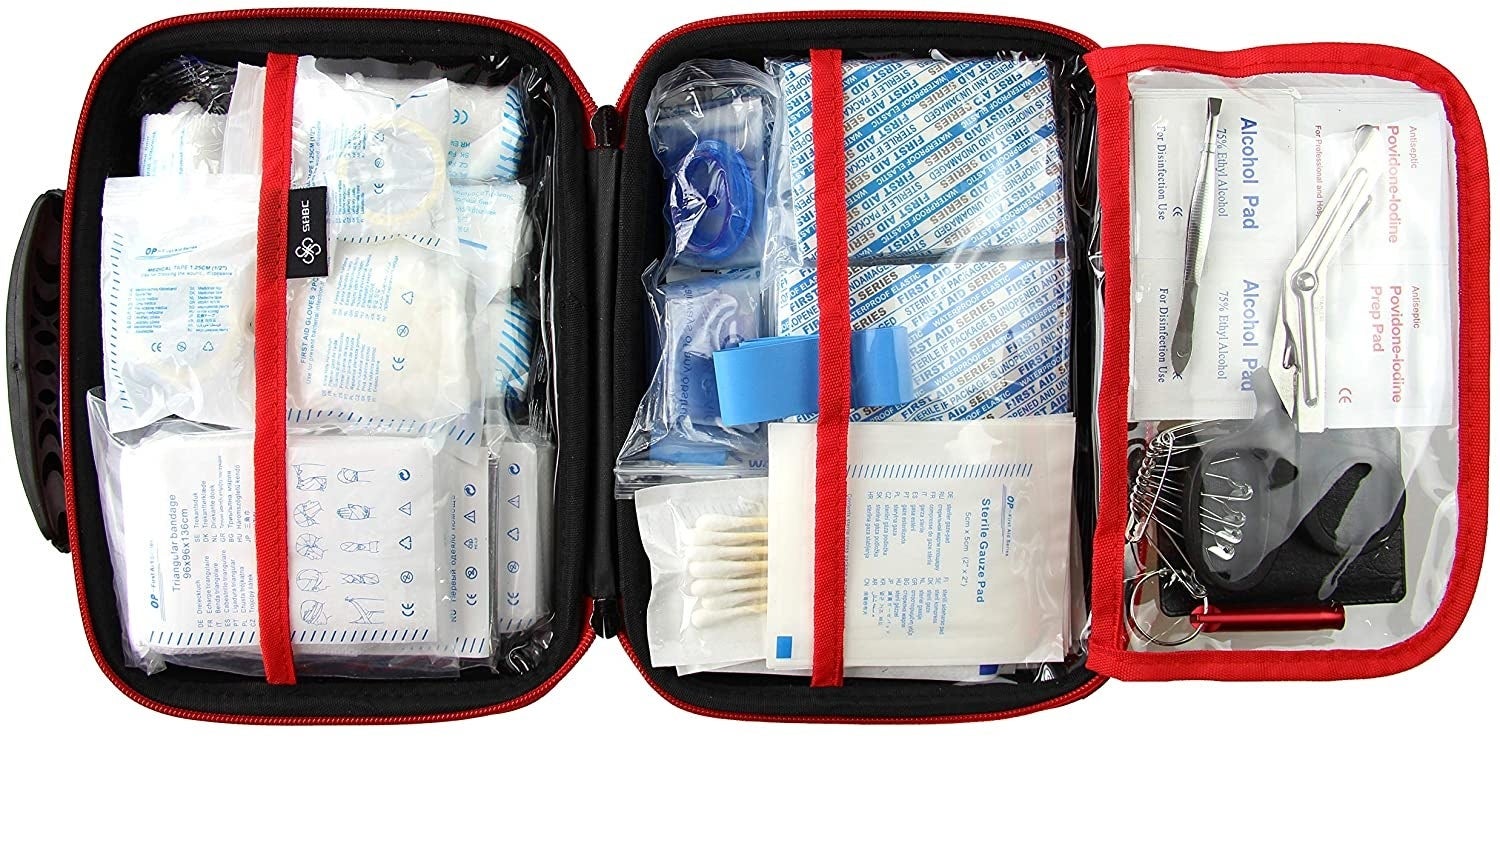 The first aid kit opened showing everything that&#x27;s inside against a plain background